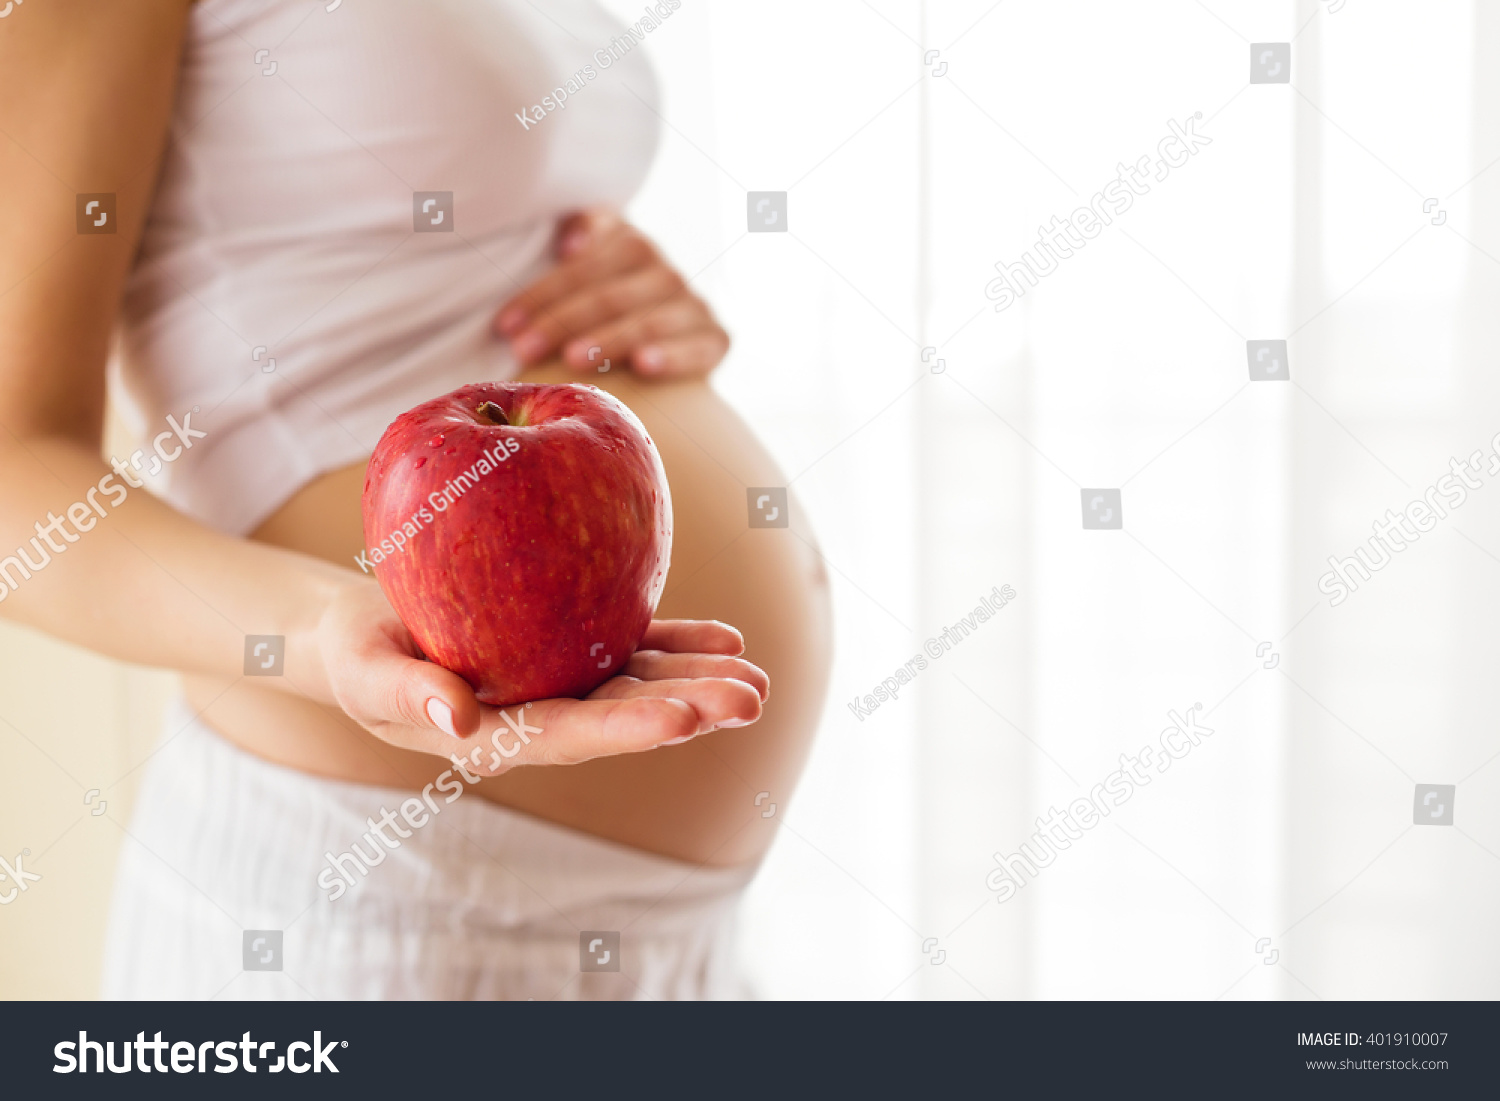 Pregnant woman holding apple in one hand  #401910007